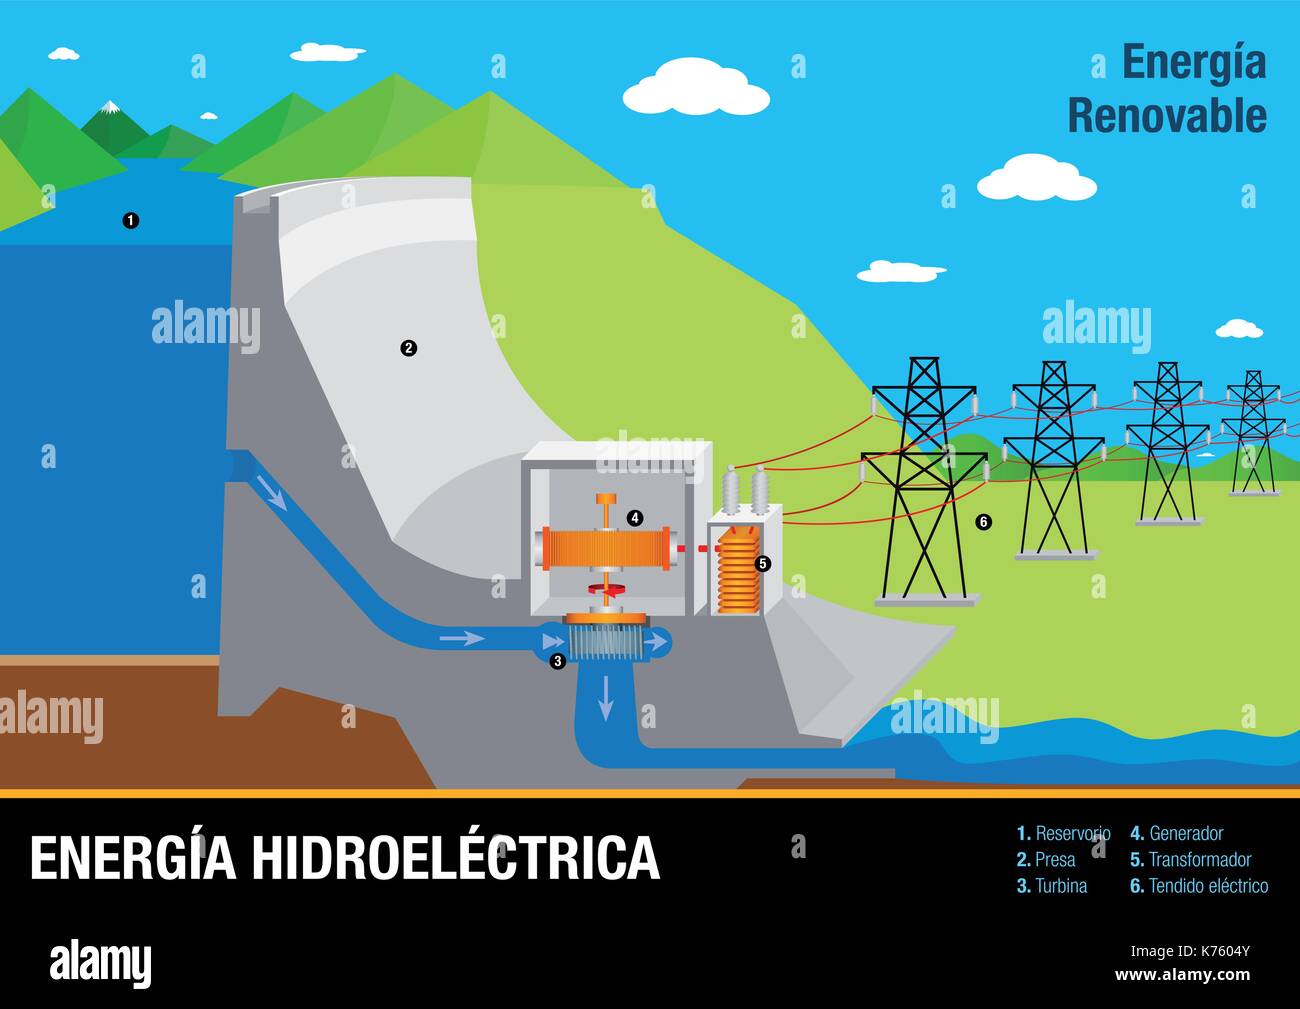 Graph illustrates the operation of Energia Hidroelectrica - Hydroelectric Energy Plant in Spanish language - Renewable Energy Stock Vector